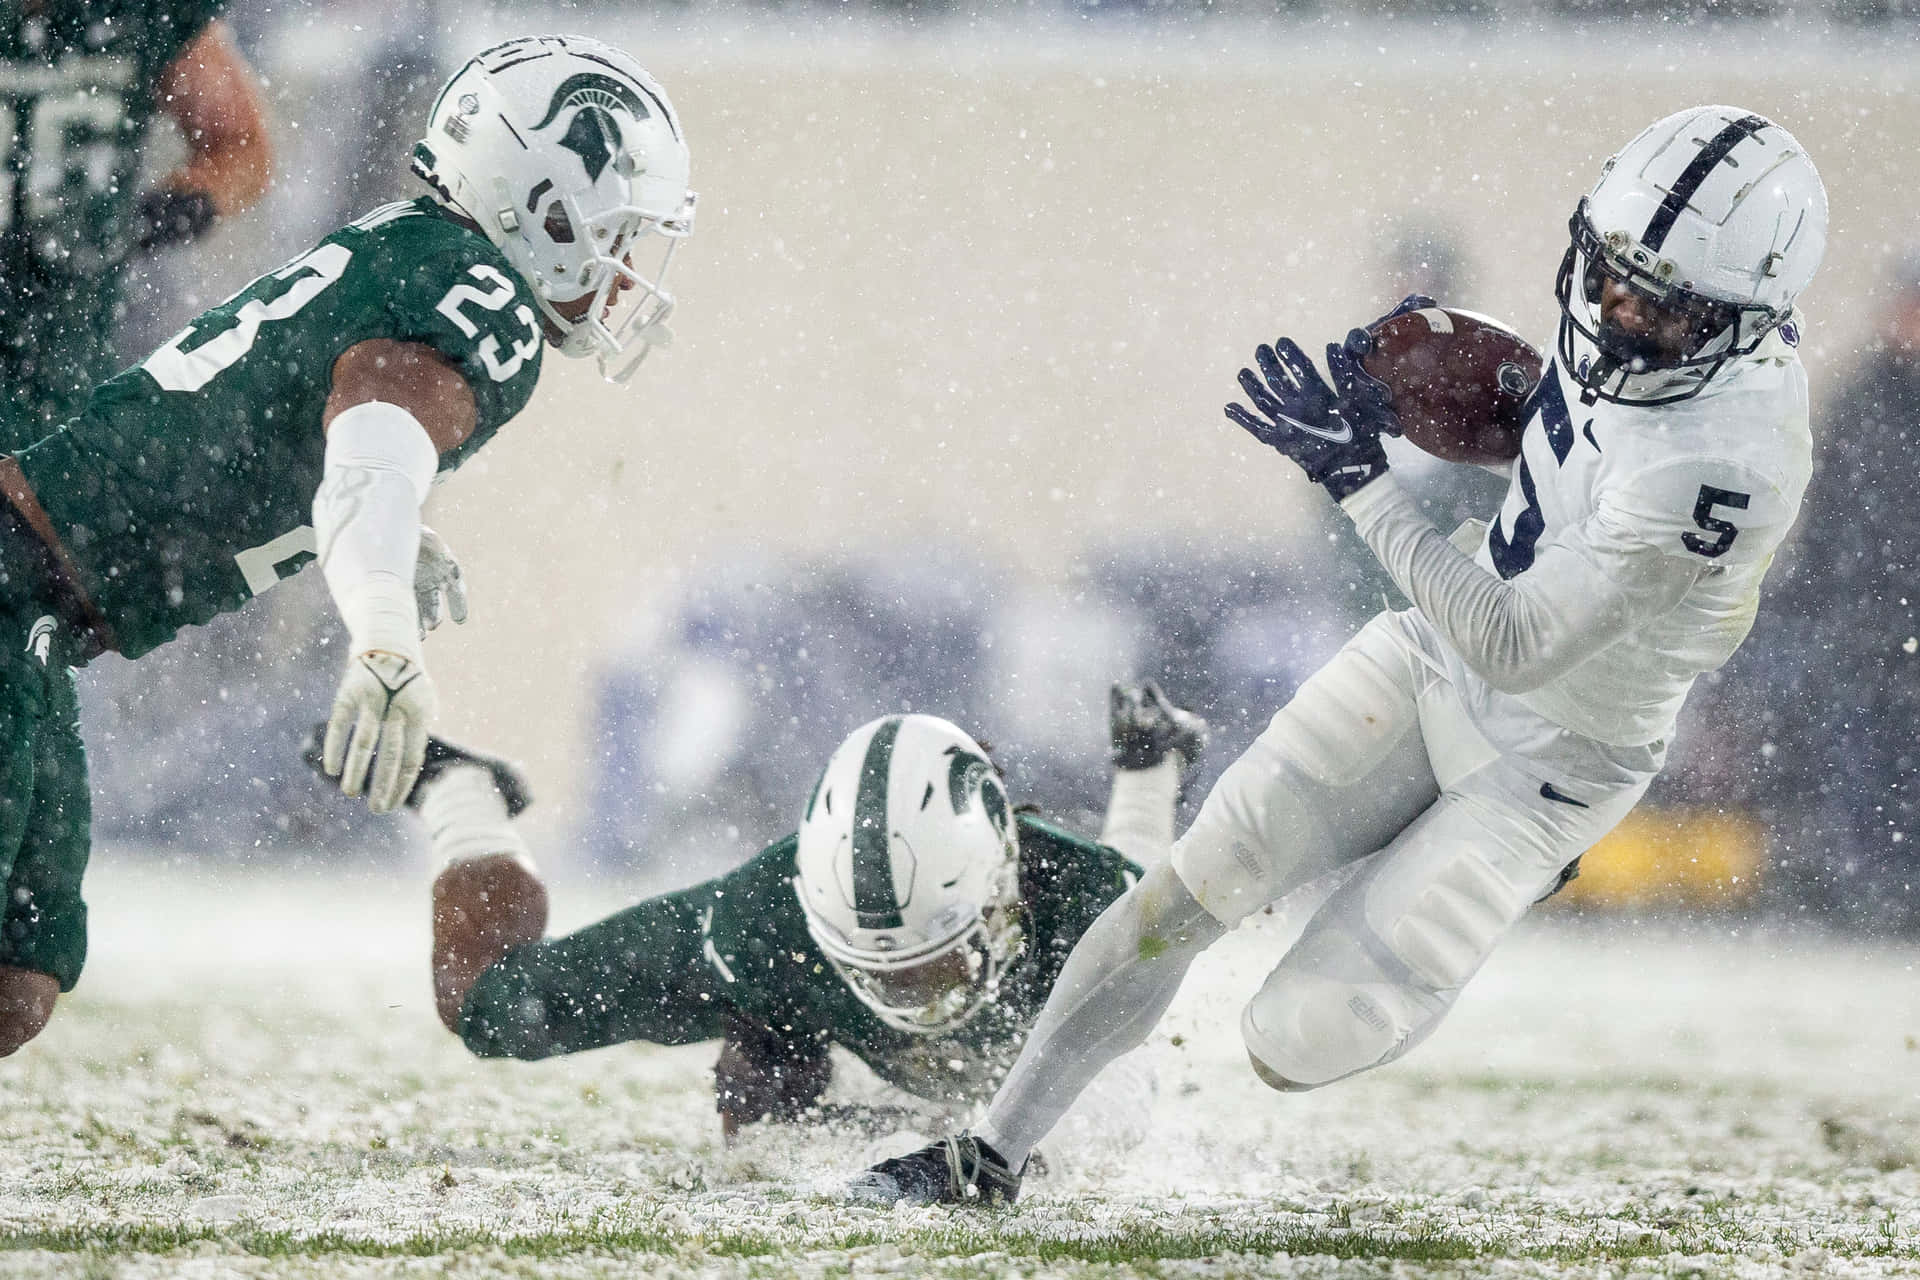 Snowy Football Game Action Wallpaper